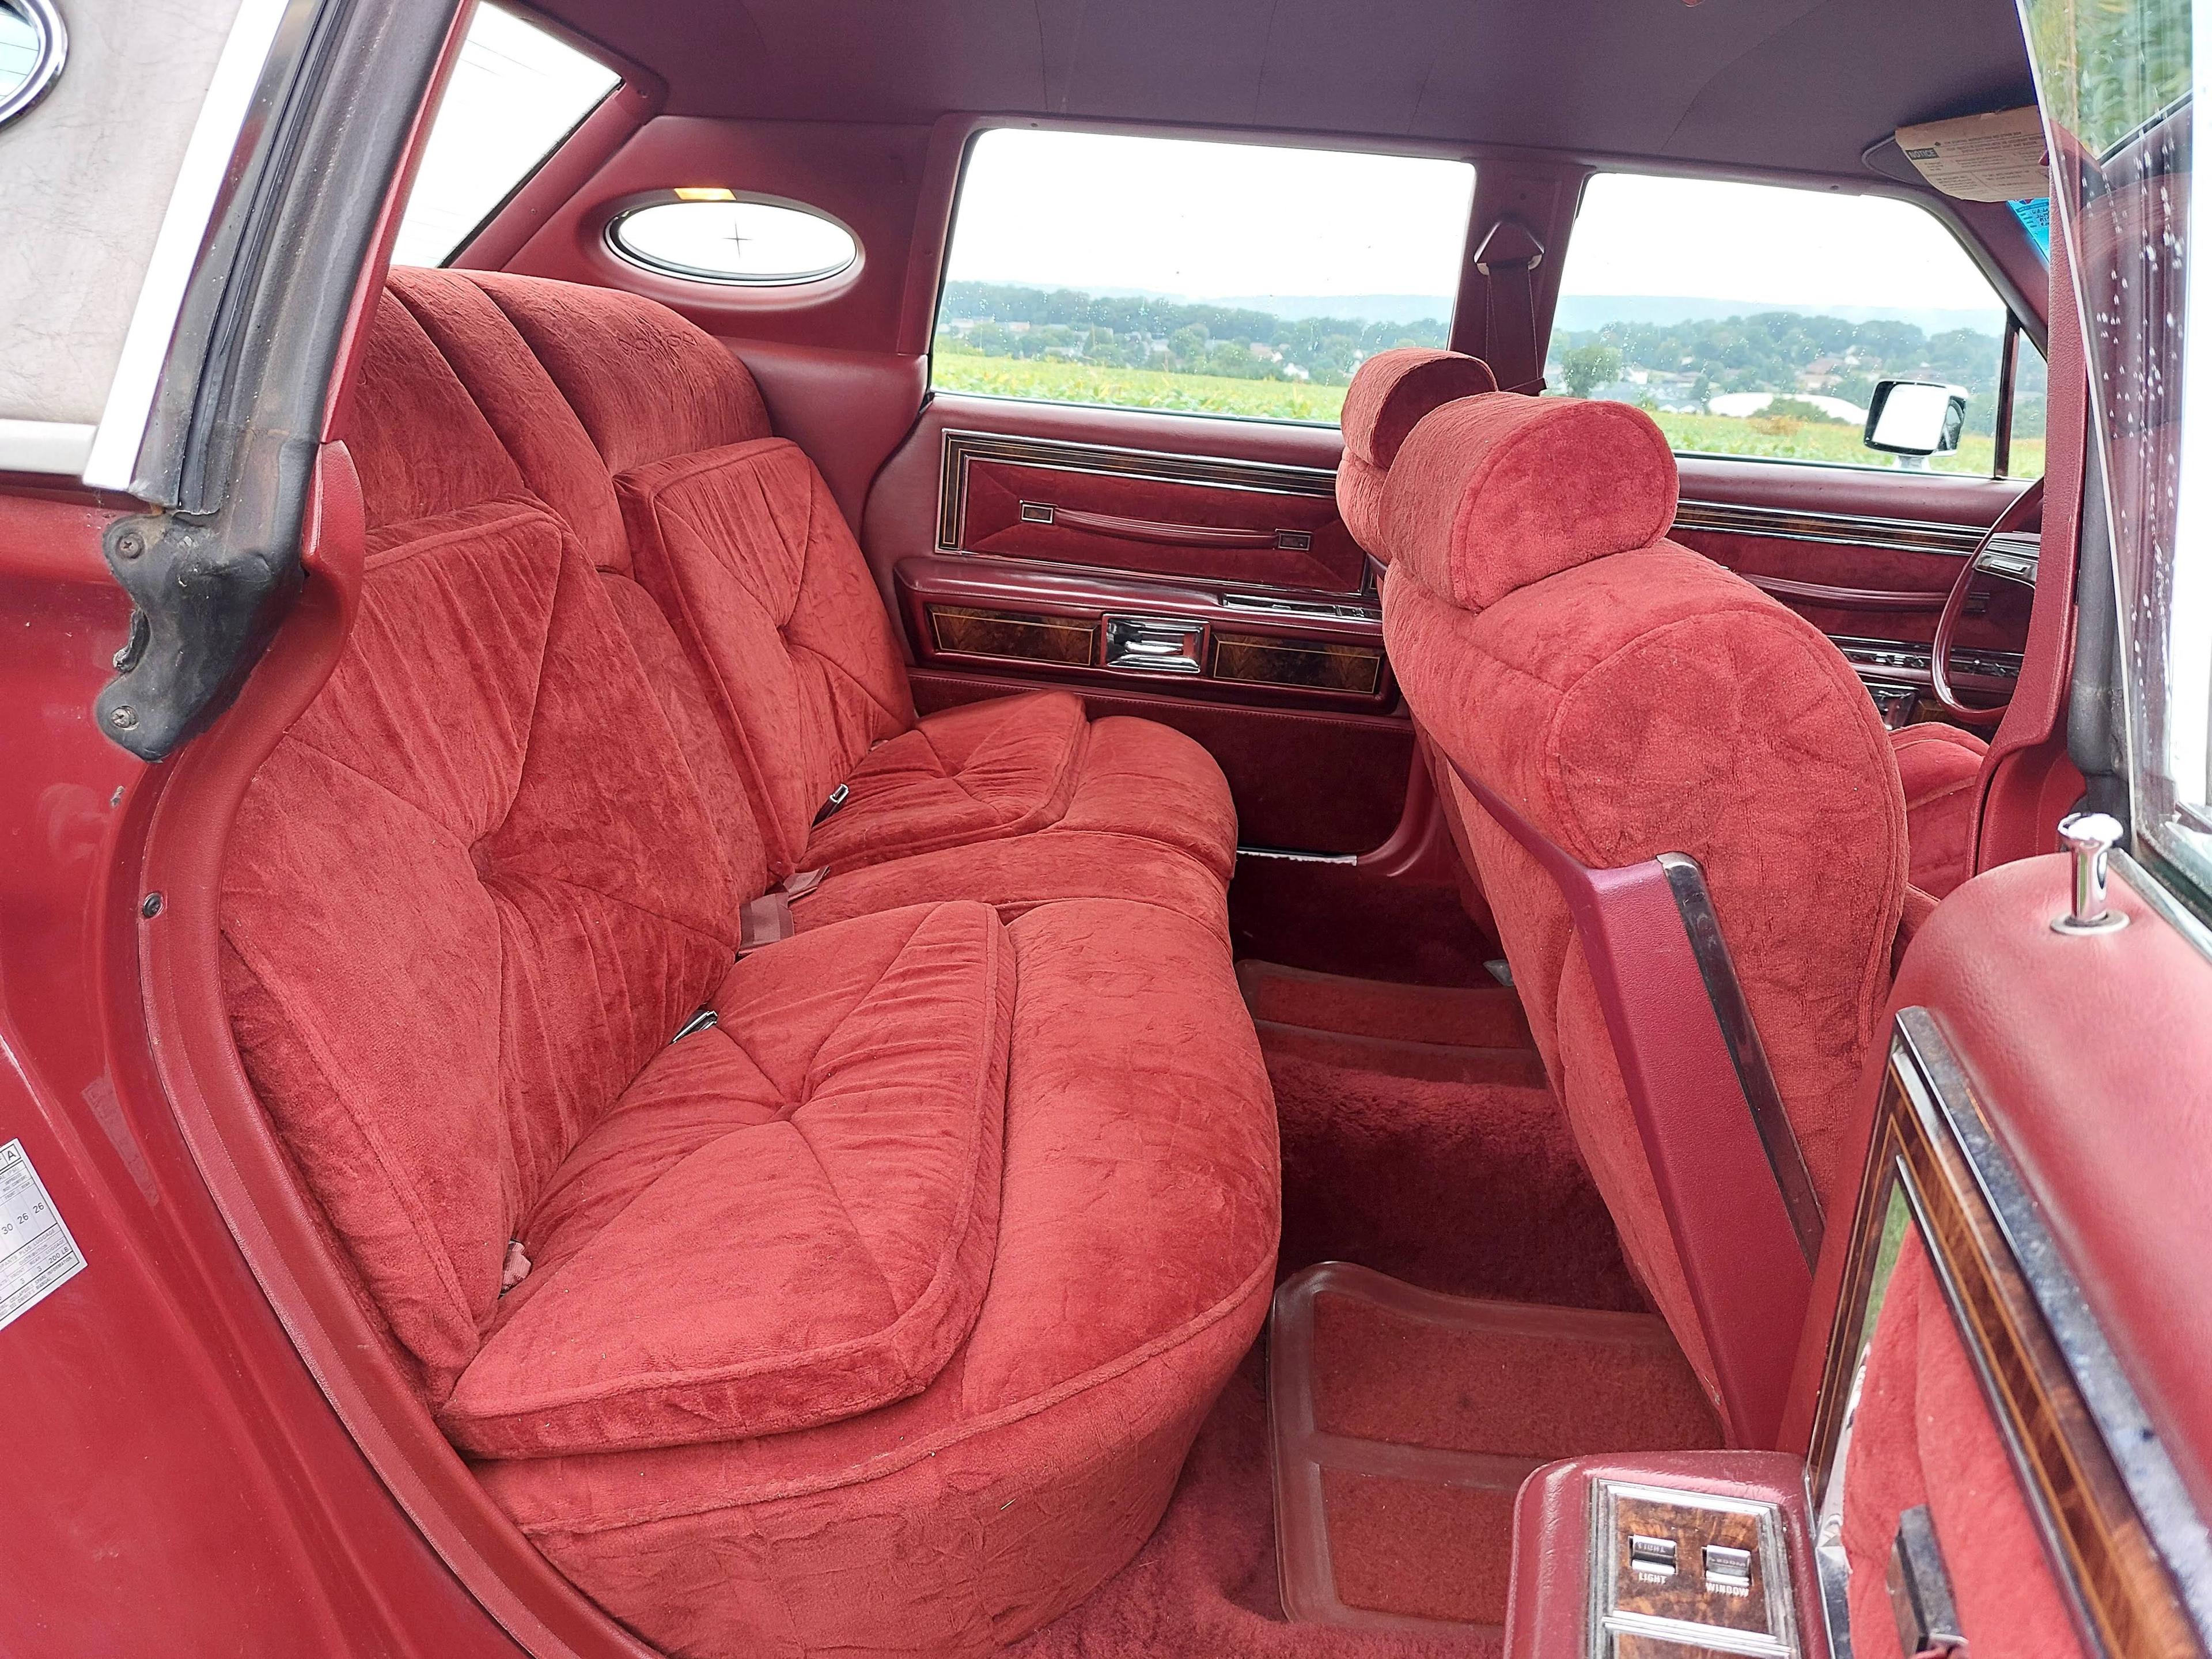 1978 Lincoln Continental Town Car Sedan.Paint Dark Red Metallic with red ve